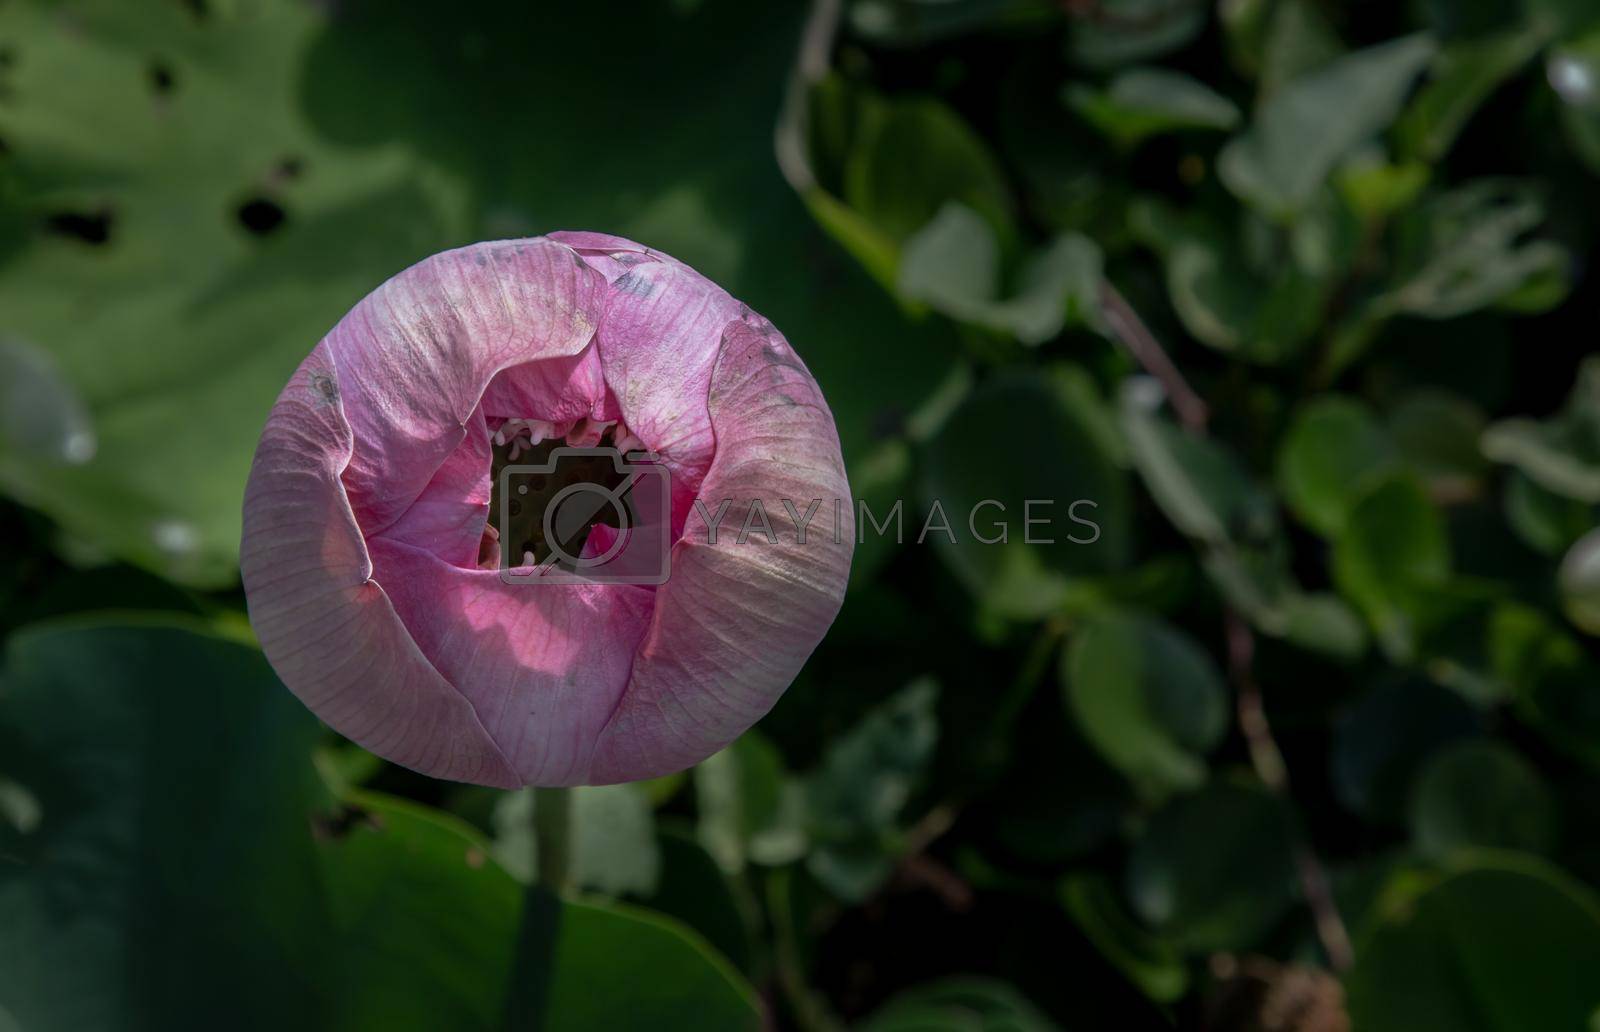 Bud of Pink fancy waterlily or lotus flower in pond with green water lily leaves background. A lotus flower in early puberty, Lotus is logo of spa and buddhism in asia, Top view, Copy space. Selective focus.